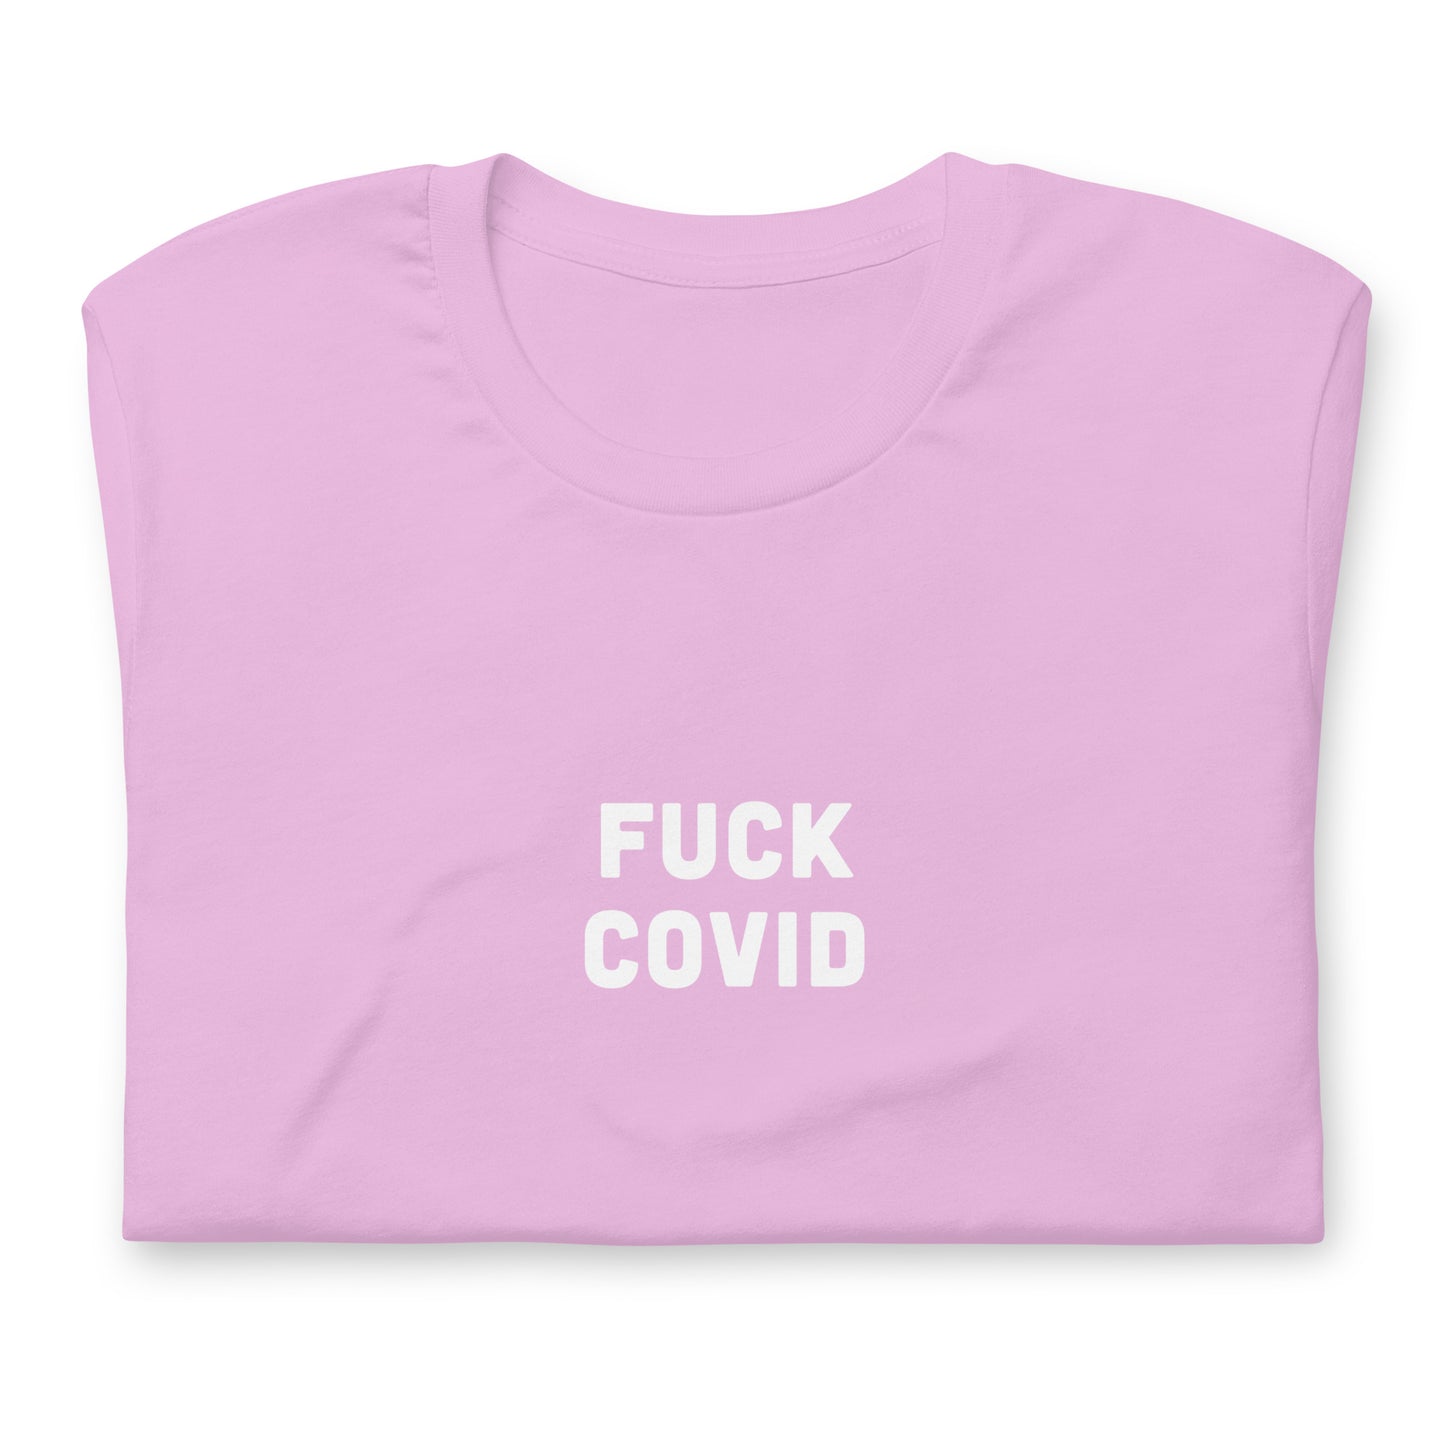 Fuck Covid T-Shirt Size 2XL Color Forest